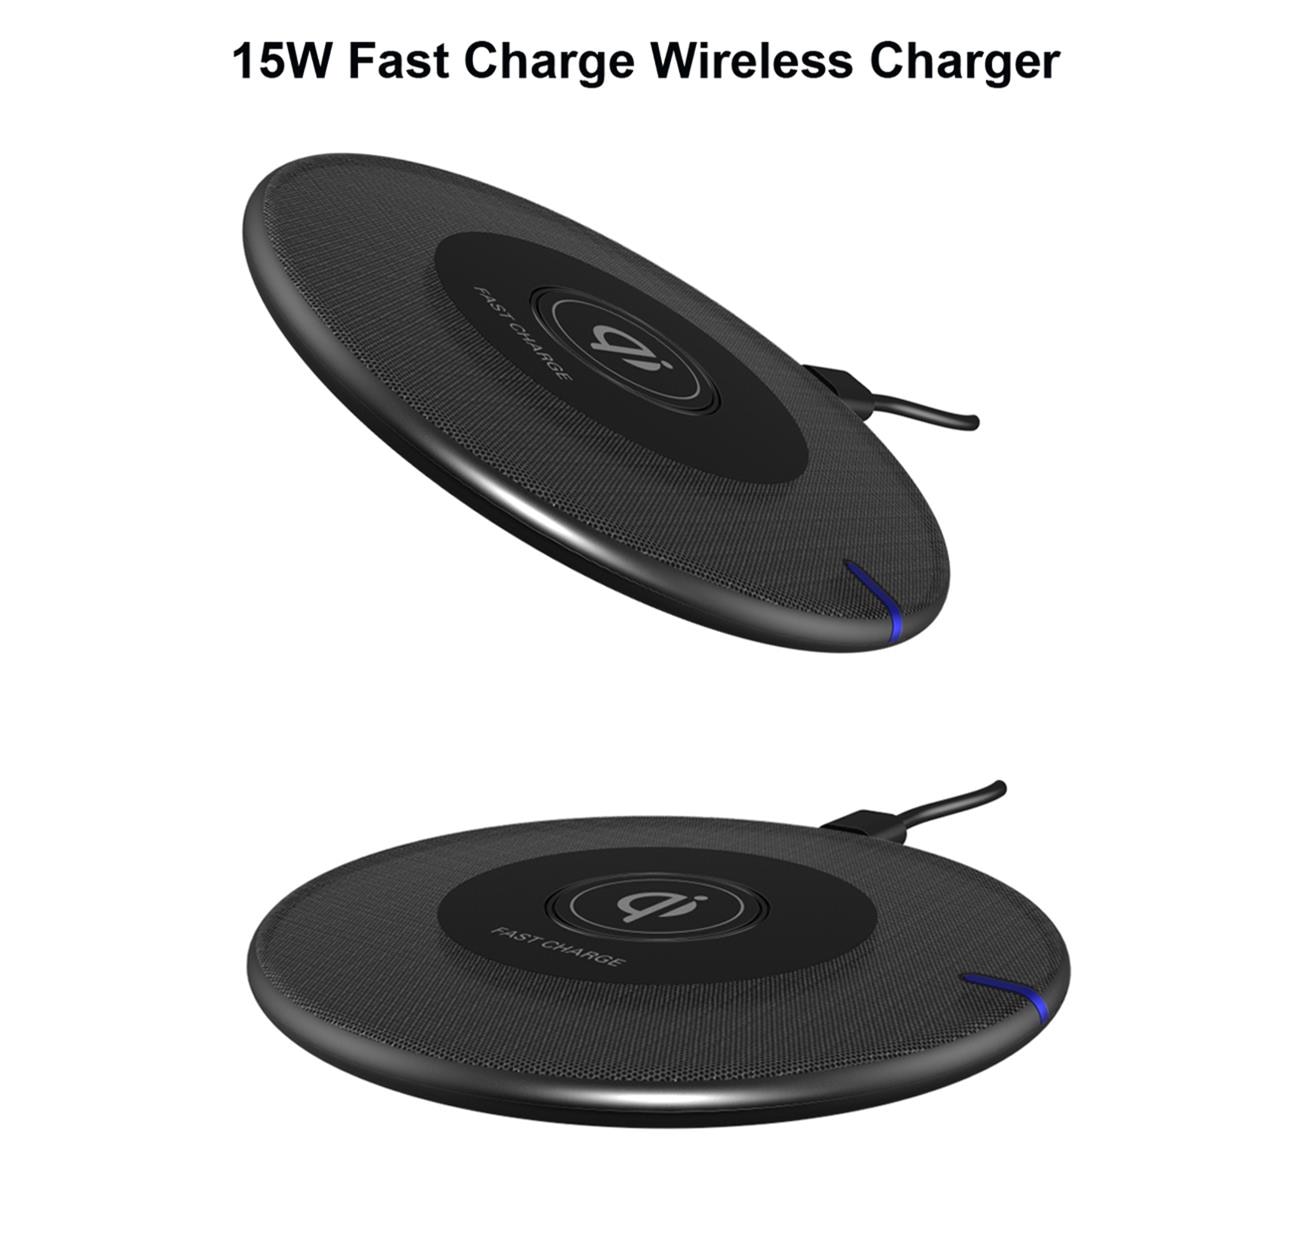 Wireless Charger 6mm Super Slim 15w Fast Charge For Smart Phone